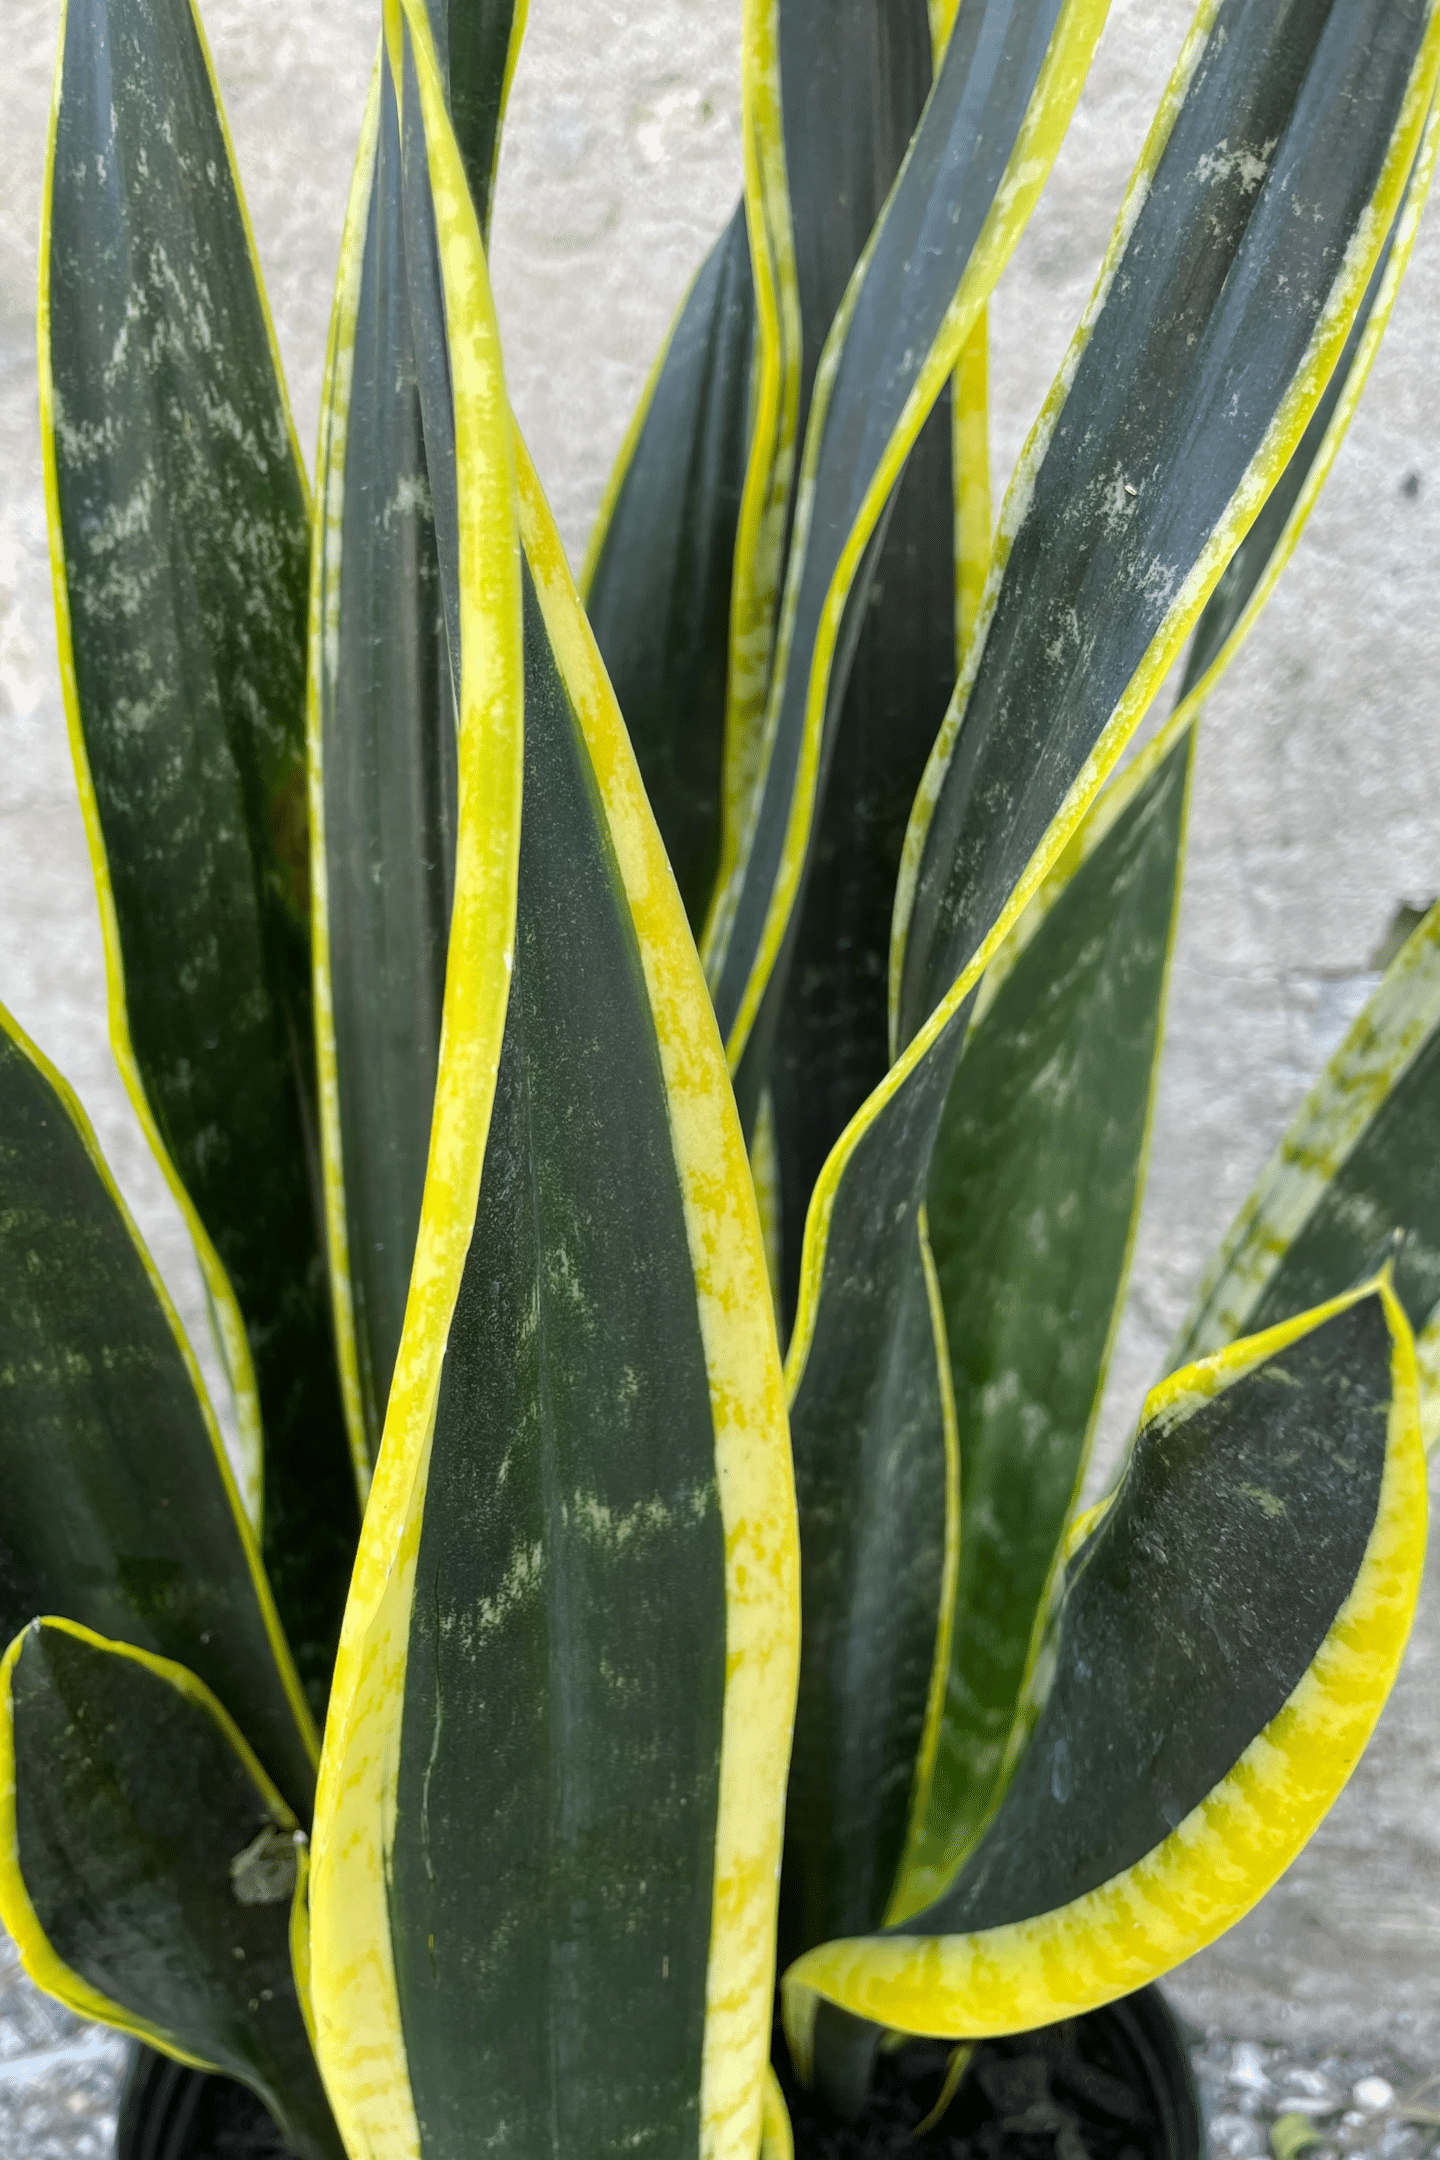 Black God sansevieria plant with green leaves and yellow edges